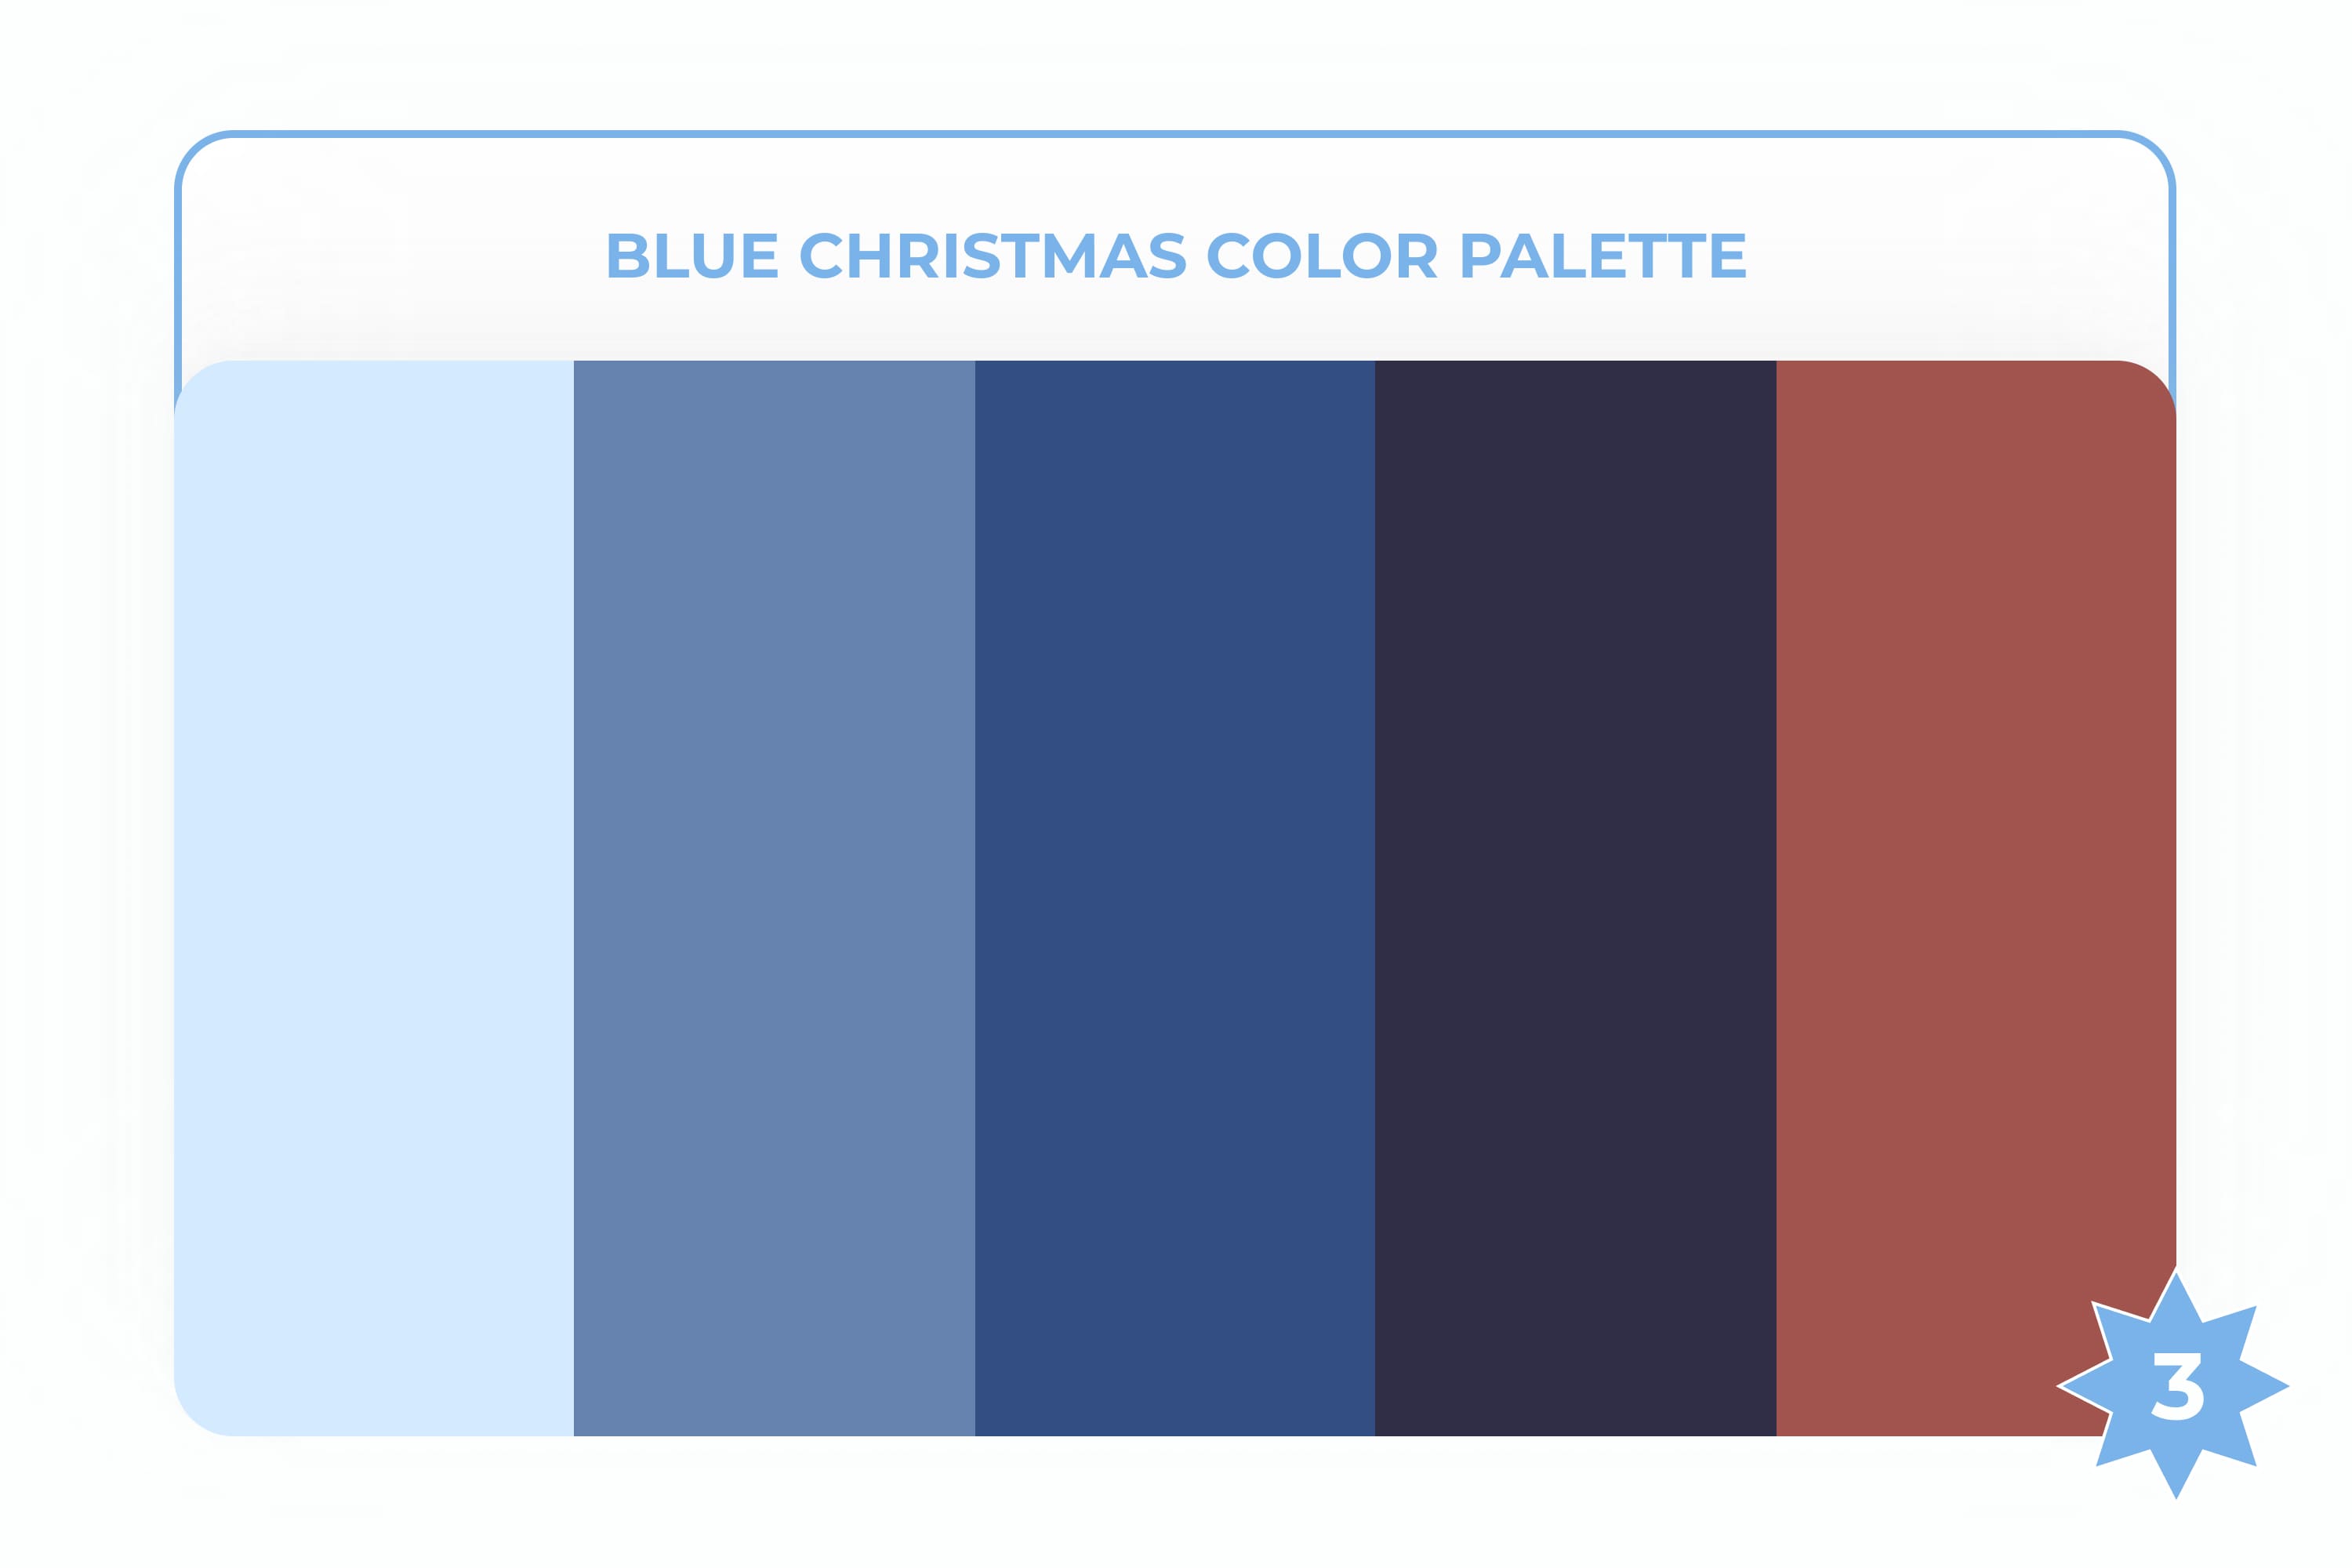 Collage of colored stripes in a blue palette with brown and blue.